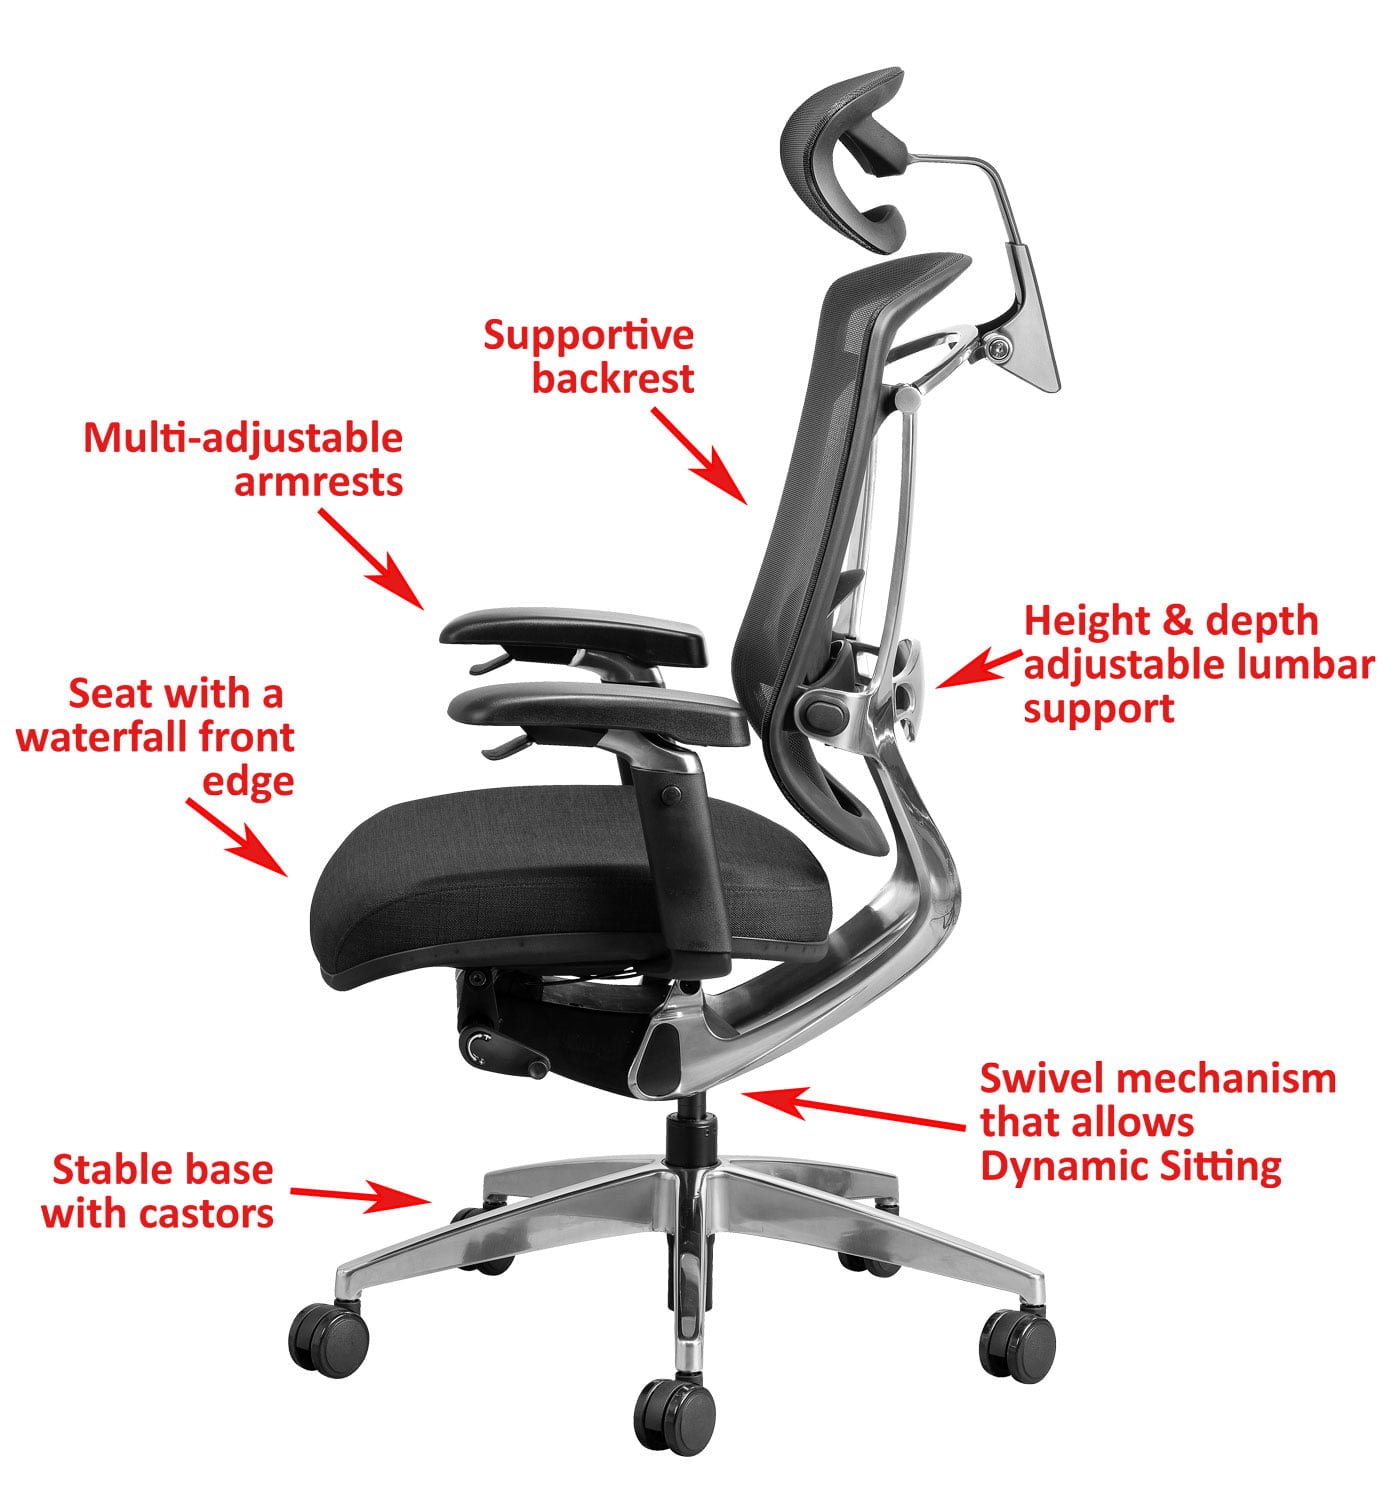 features of an ergonomic office desk chair for sale in south africa